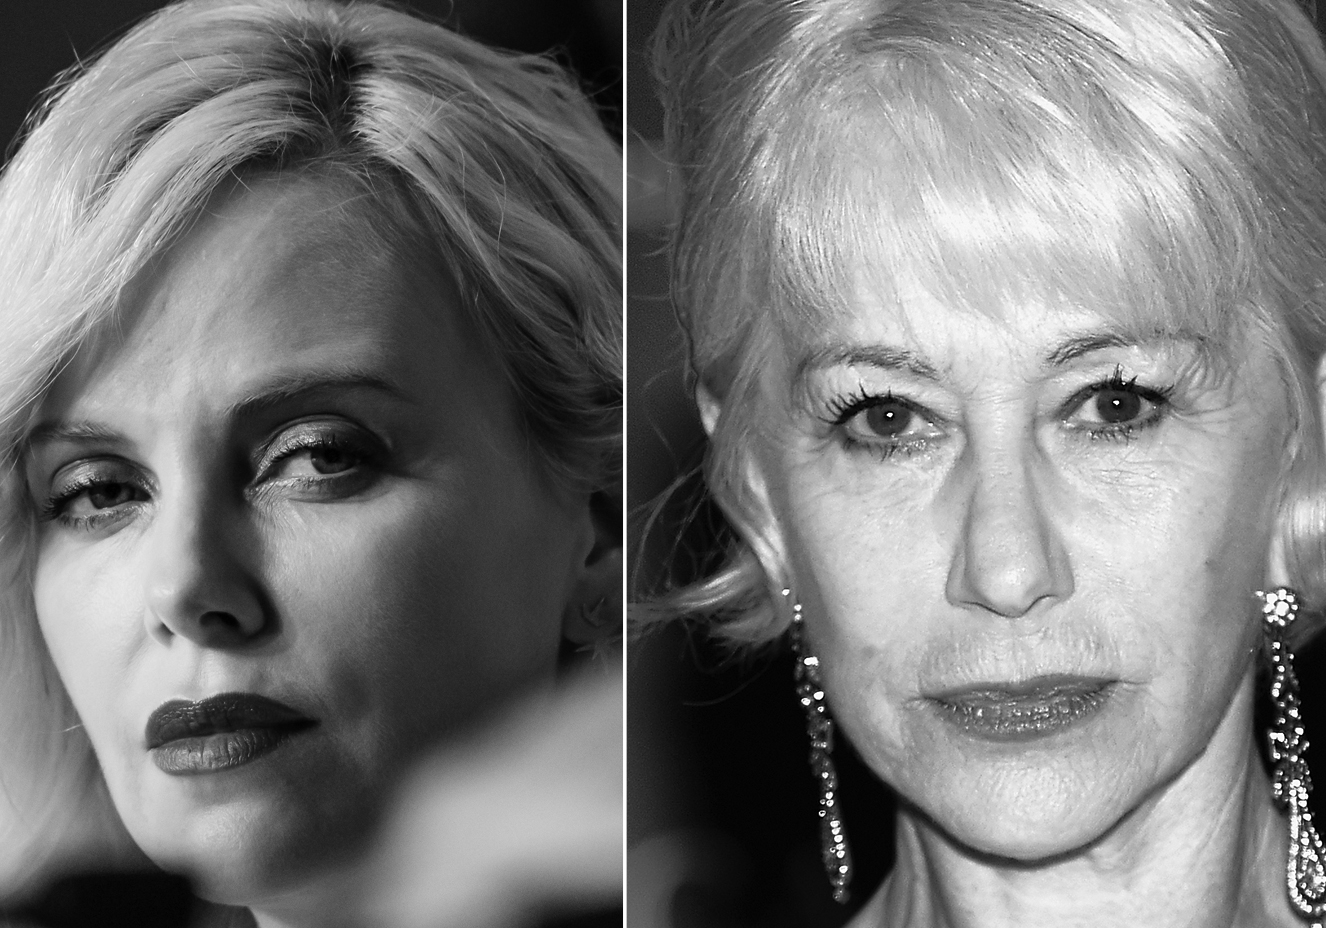 WASHINGTON, DC - APRIL 30:  (EDITORS NOTE: Image has been converted to black and white.)  An alternative view of Actress Helen Mirren shows her Prince symbol tribute at  at the 102nd White House Correspondents' Association Dinner Weekend on April 30, 2016 in Washington, DC.  (Photo by Larry Busacca/Getty Images)